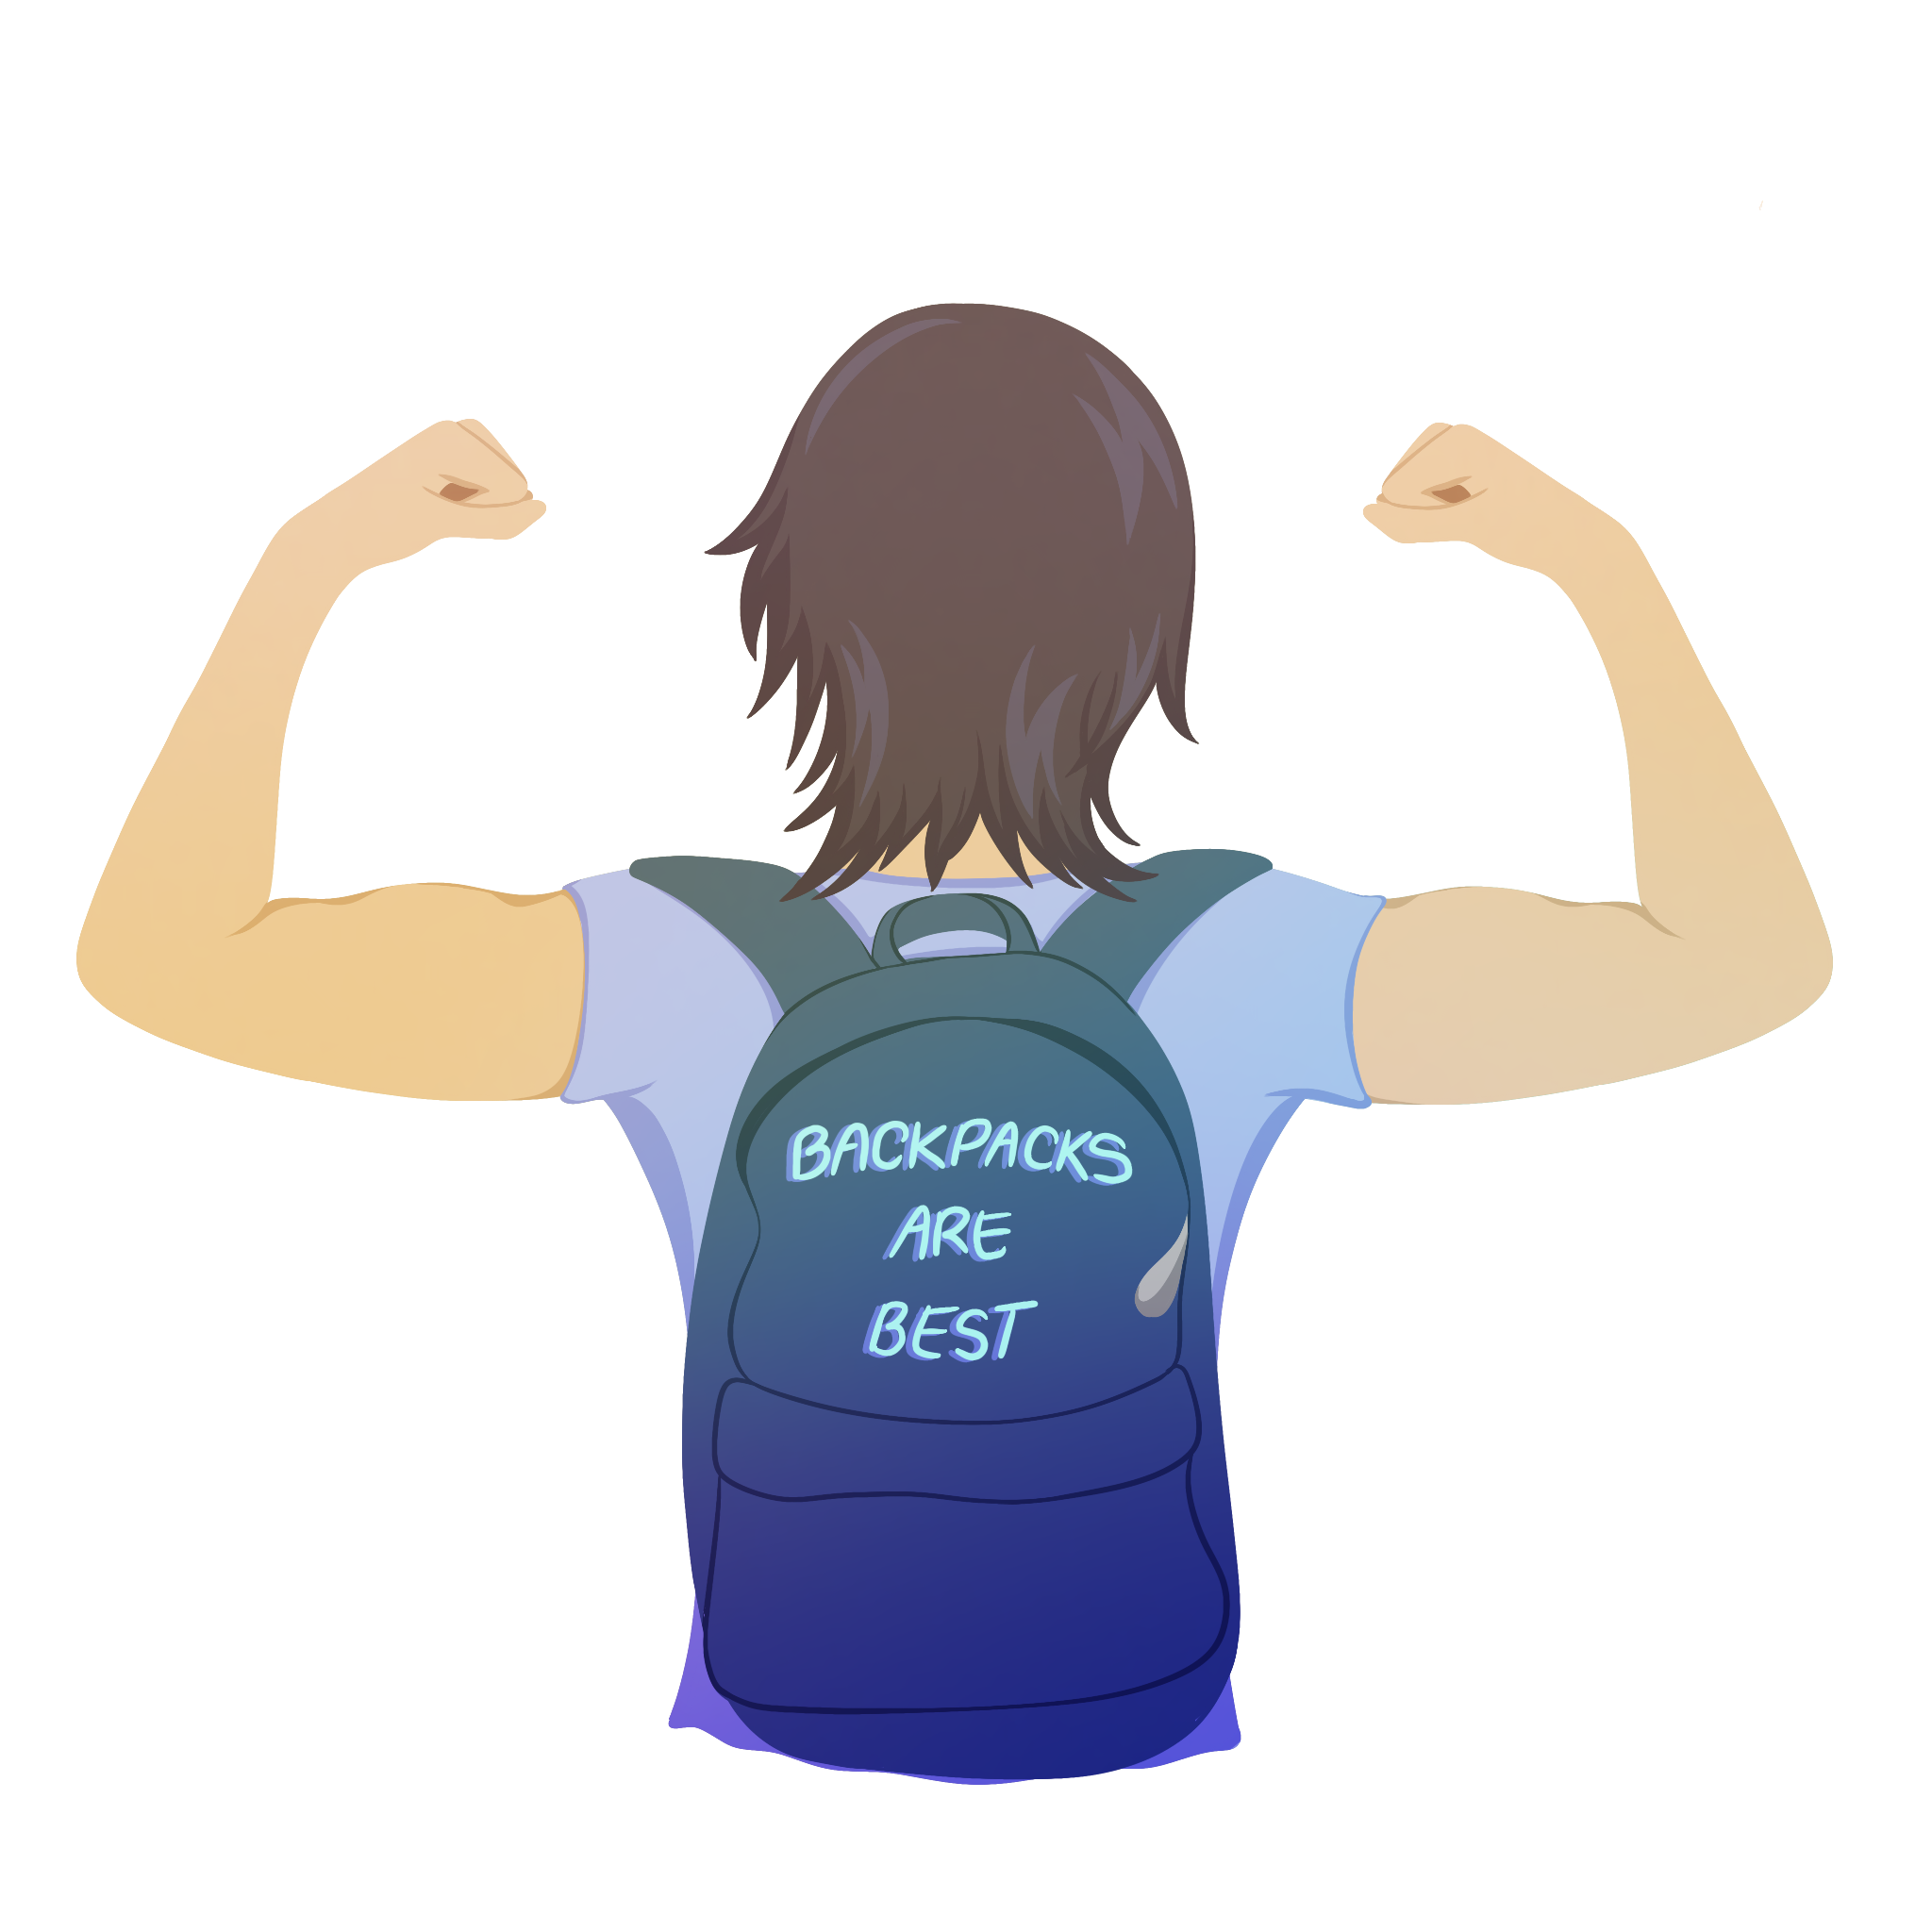 Someone wearing a backpack and flexing from behind. The backpack reads “Backpacks are best.”